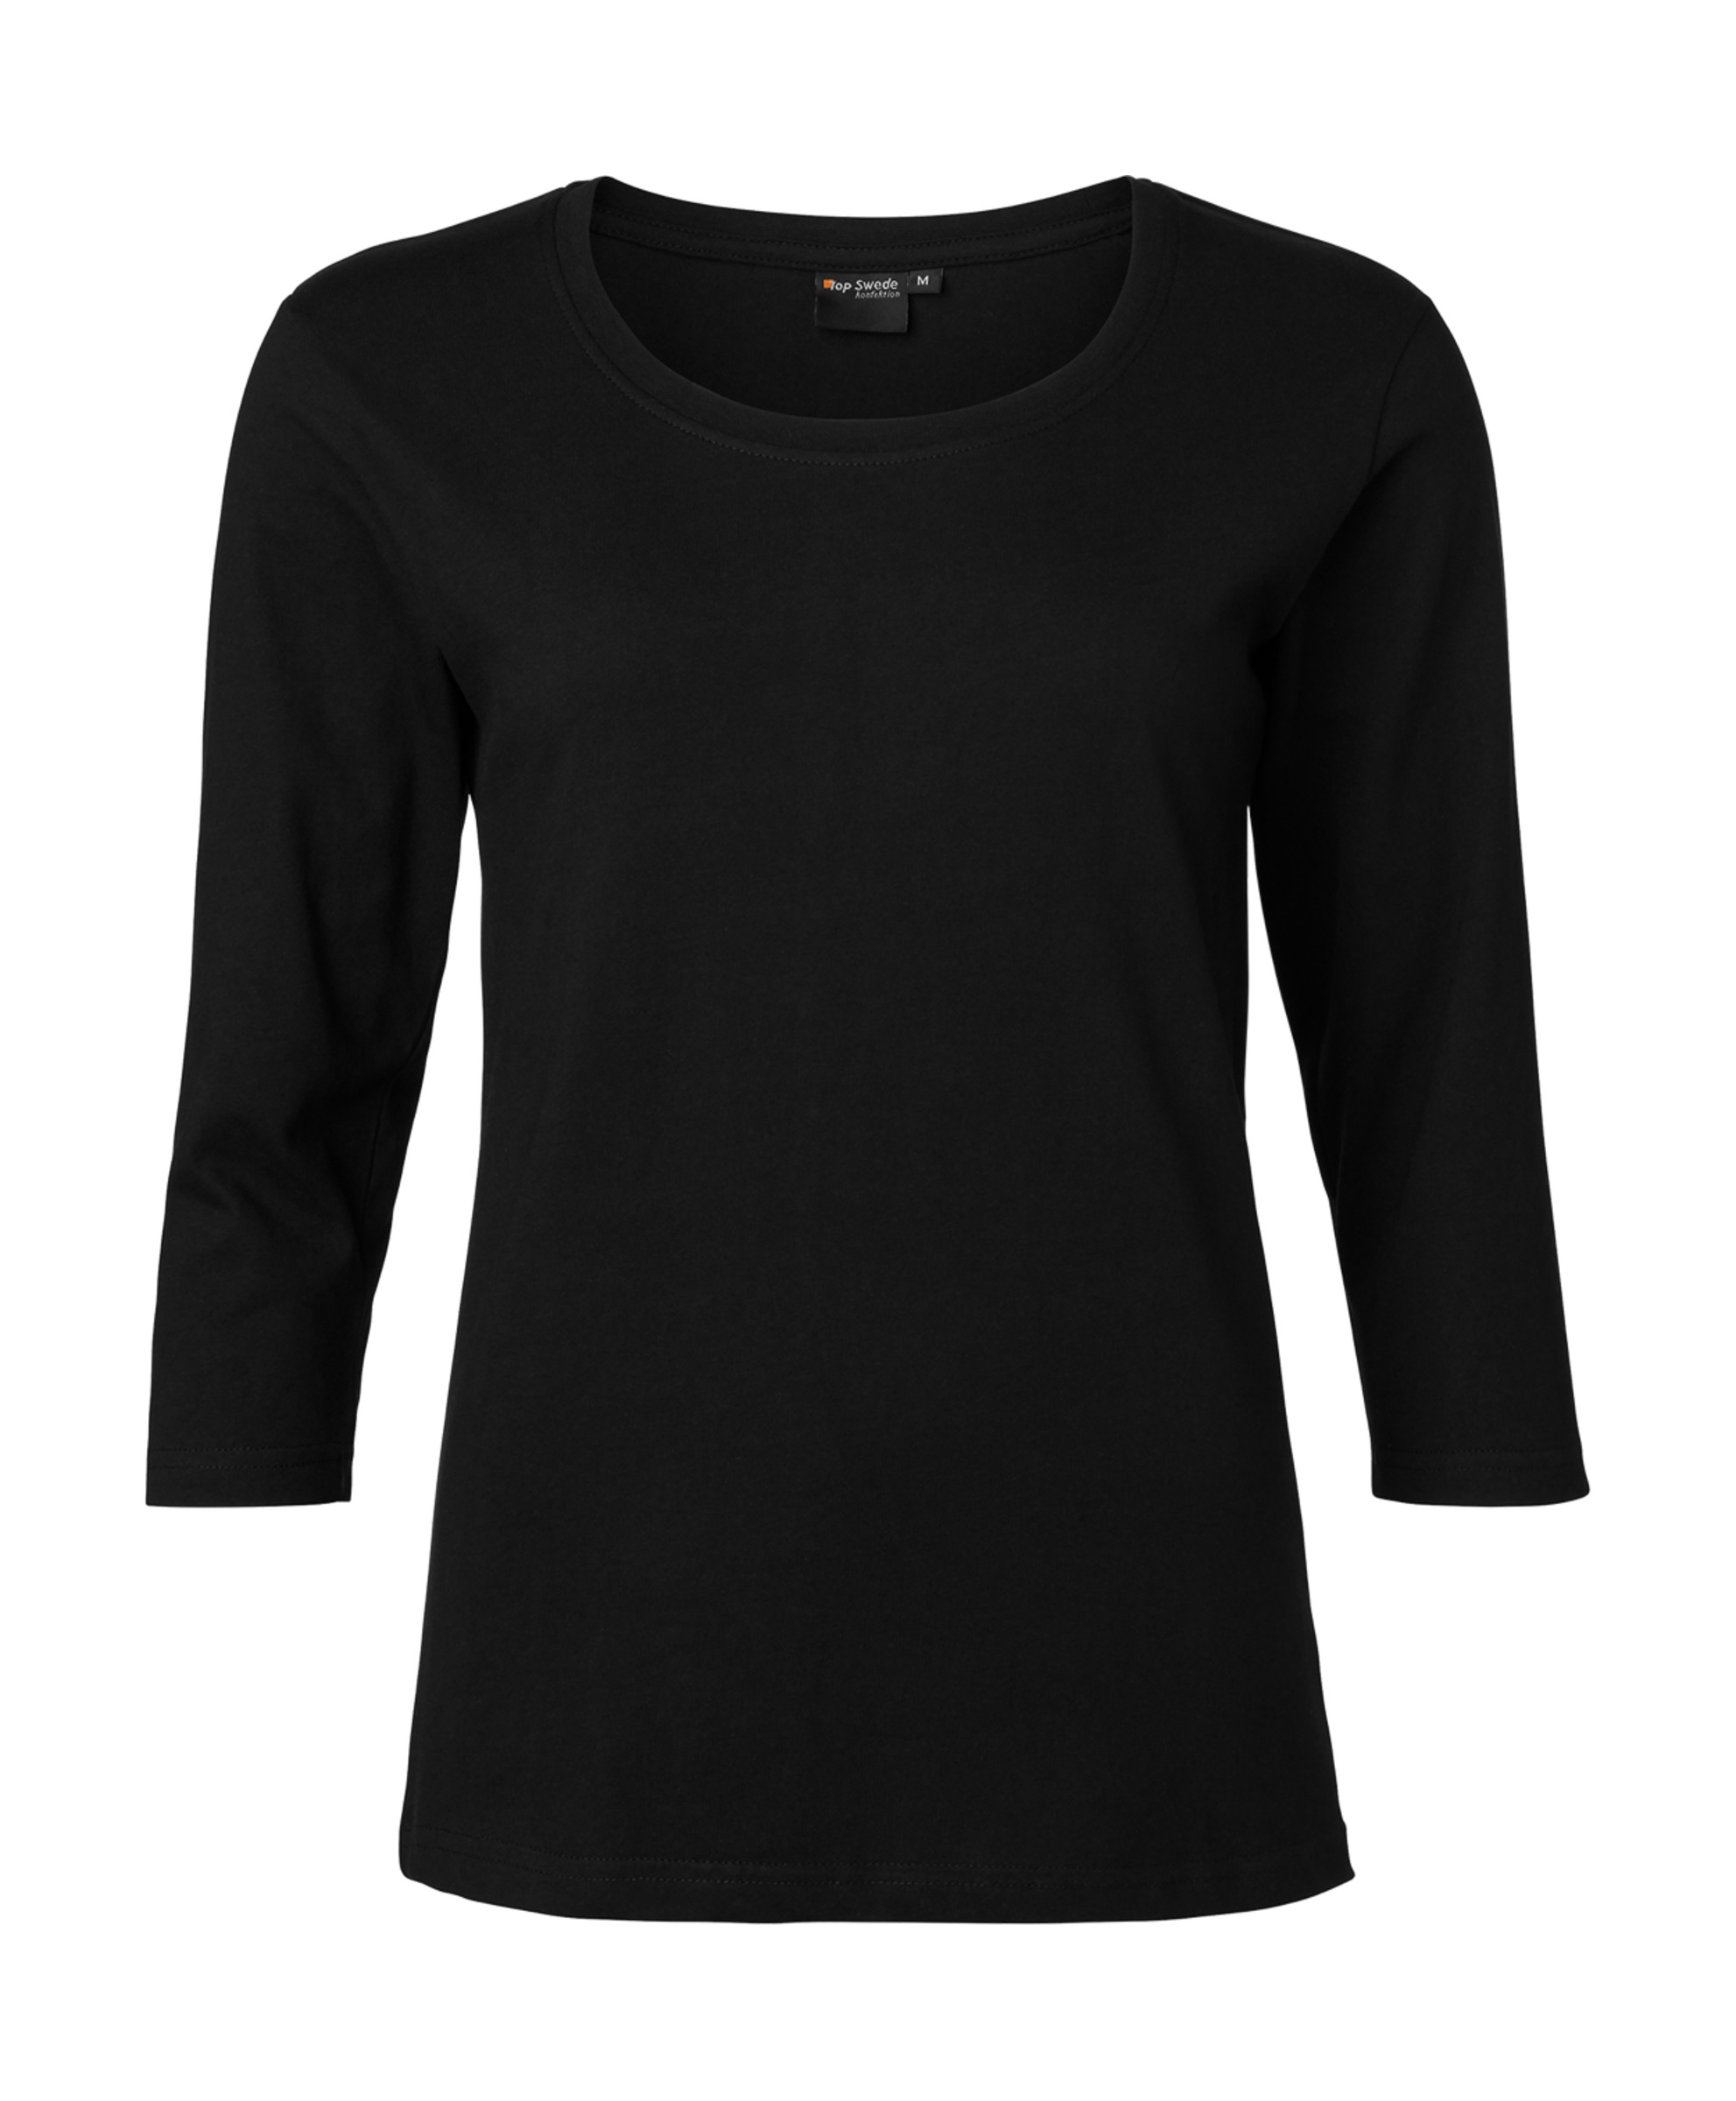 Top Swede 207 T-shirt w